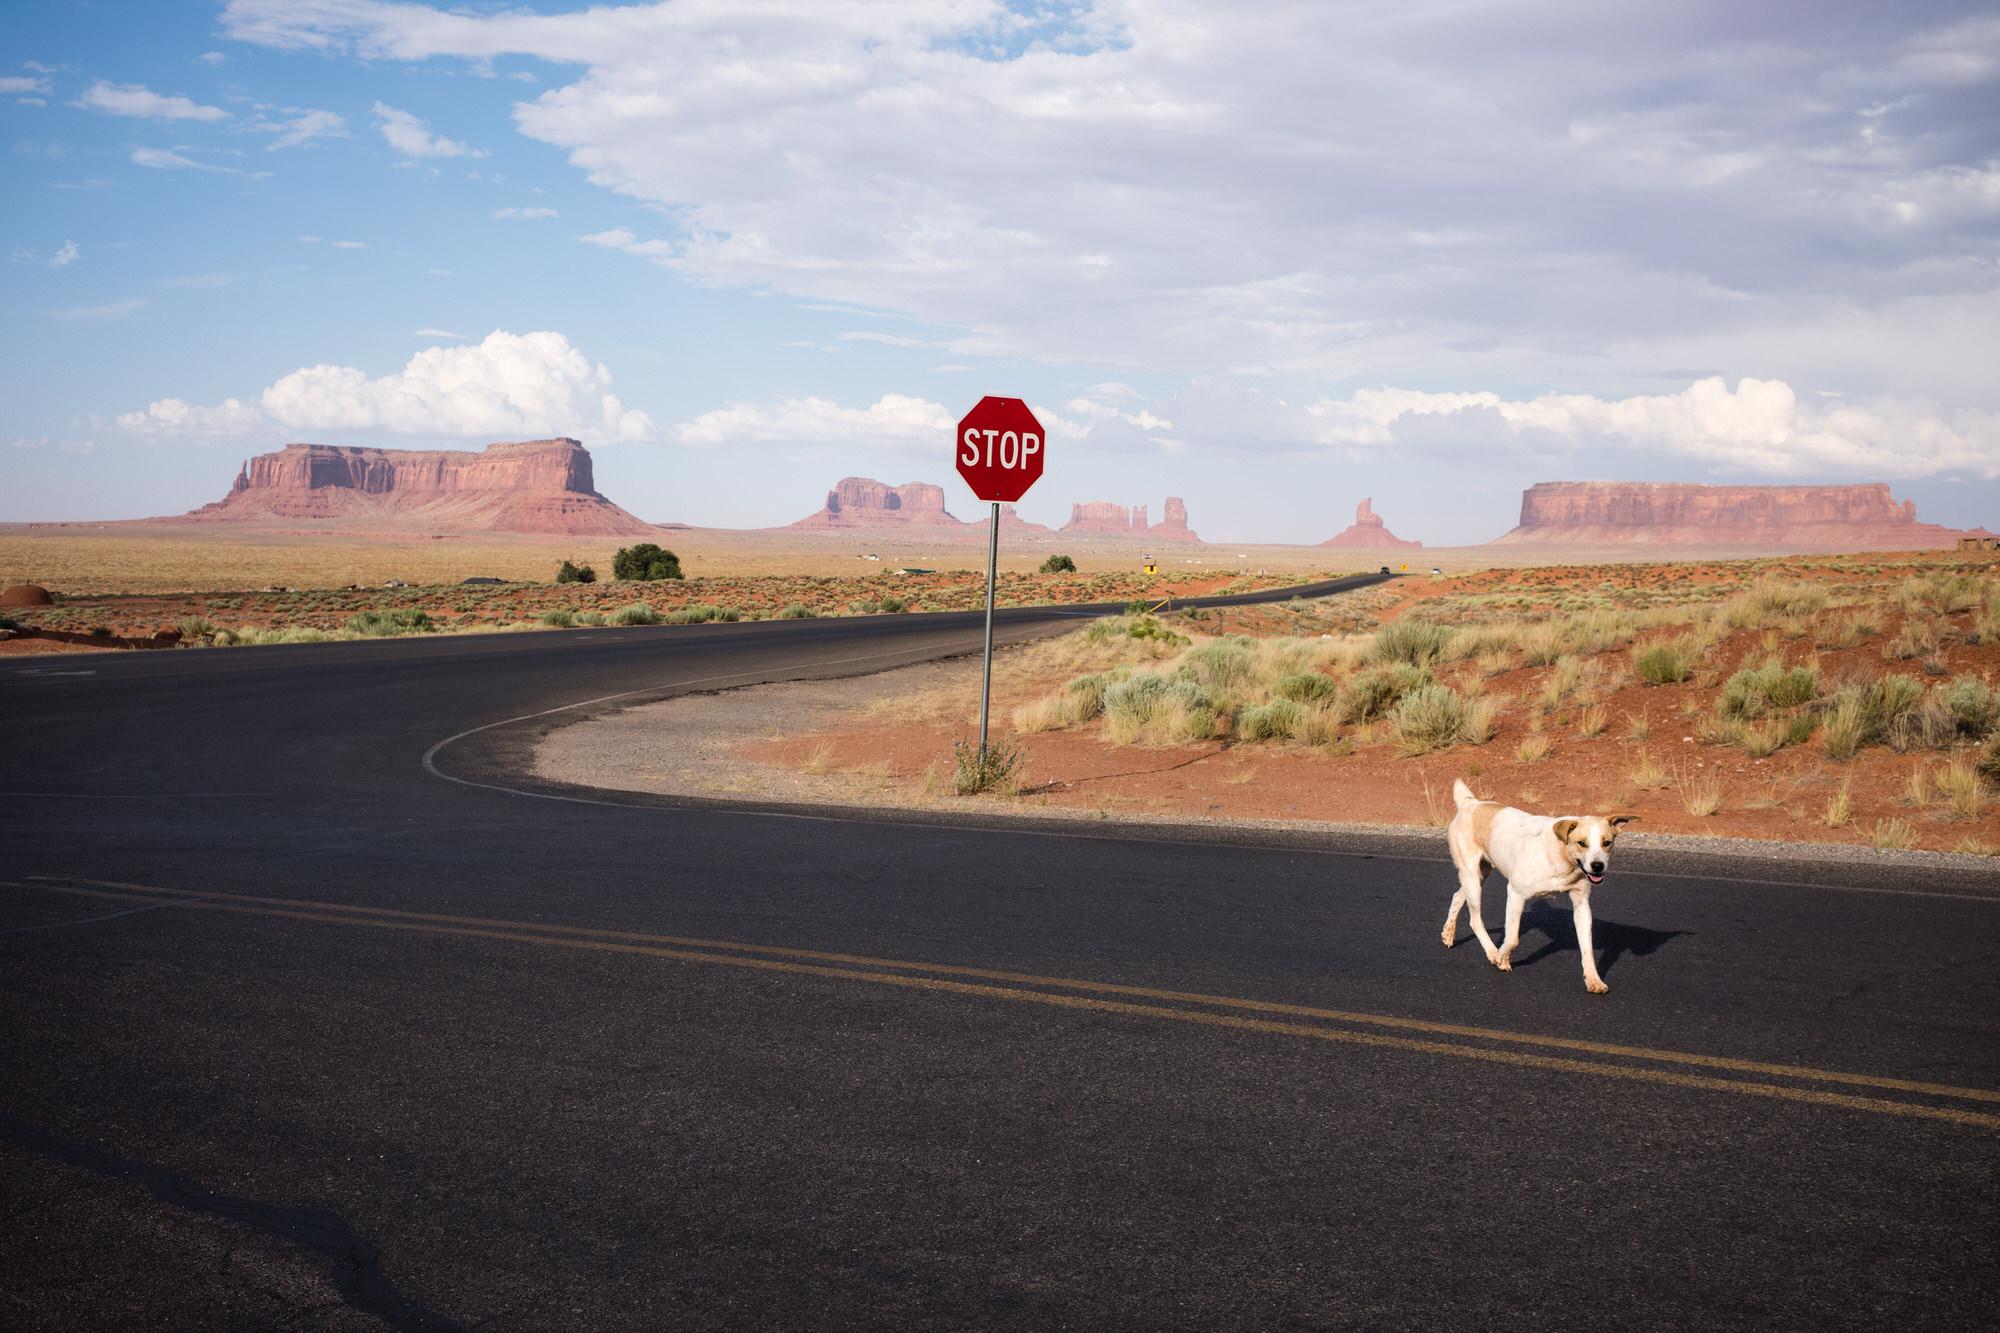 Lonesome Dog, 2017, Monument Valley, AZ, USA - Photograph by Philippe Blayo